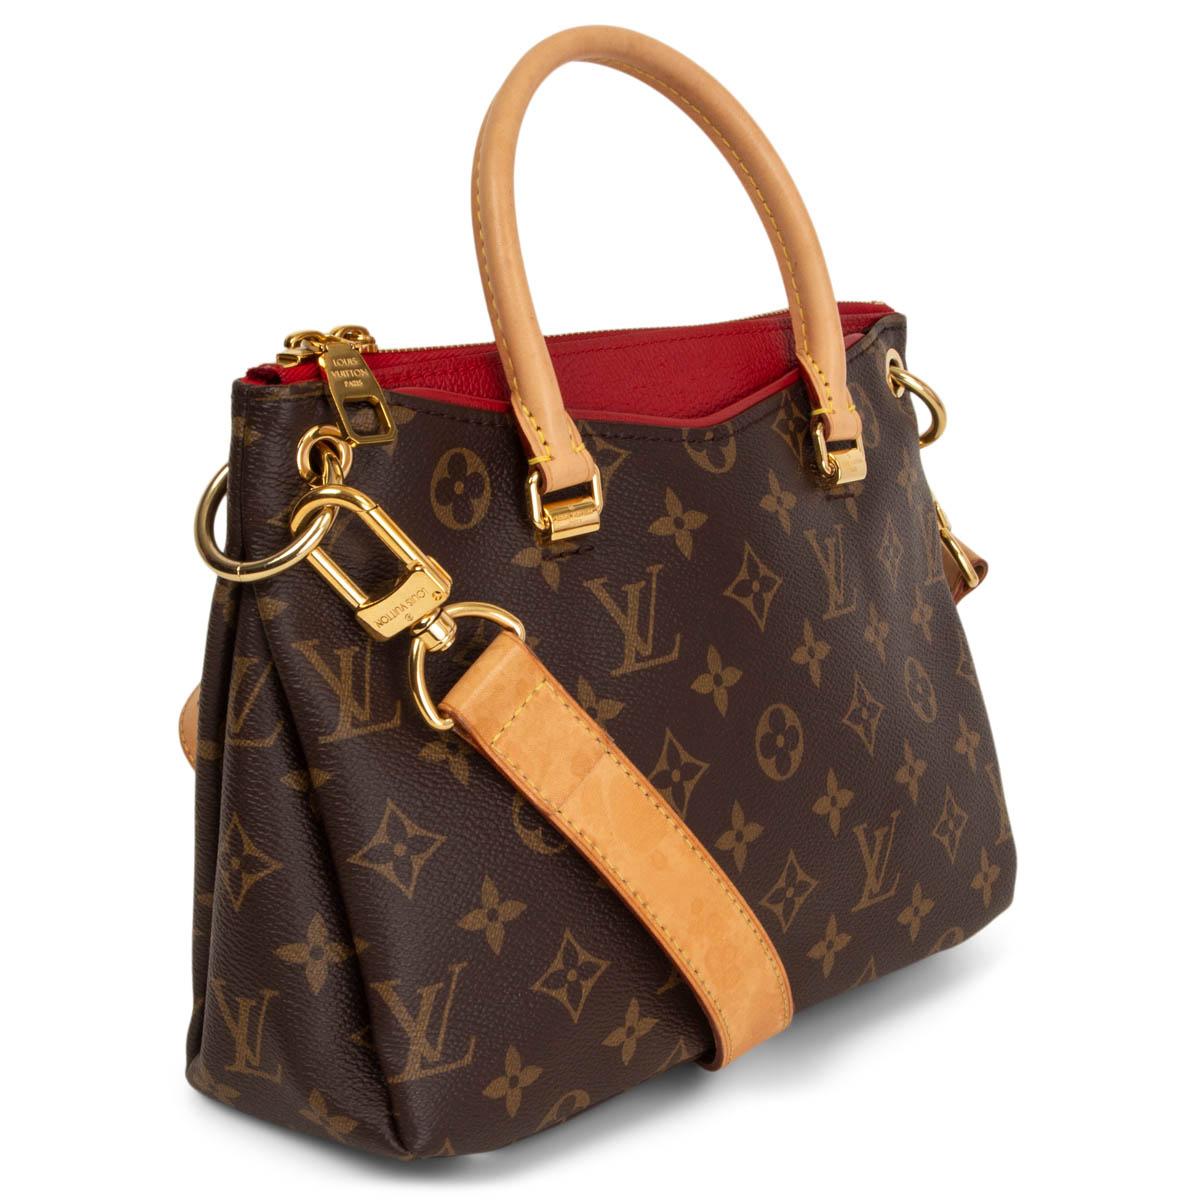 100% authentic Louis Vuitton Pallas BB Shoulder bag combines iconic Monogram canvas with supple red colored calfskin and natural cowhide-leather trim. The red leather forms a V shape at the front of the bag features two outside pockets. Opens with a